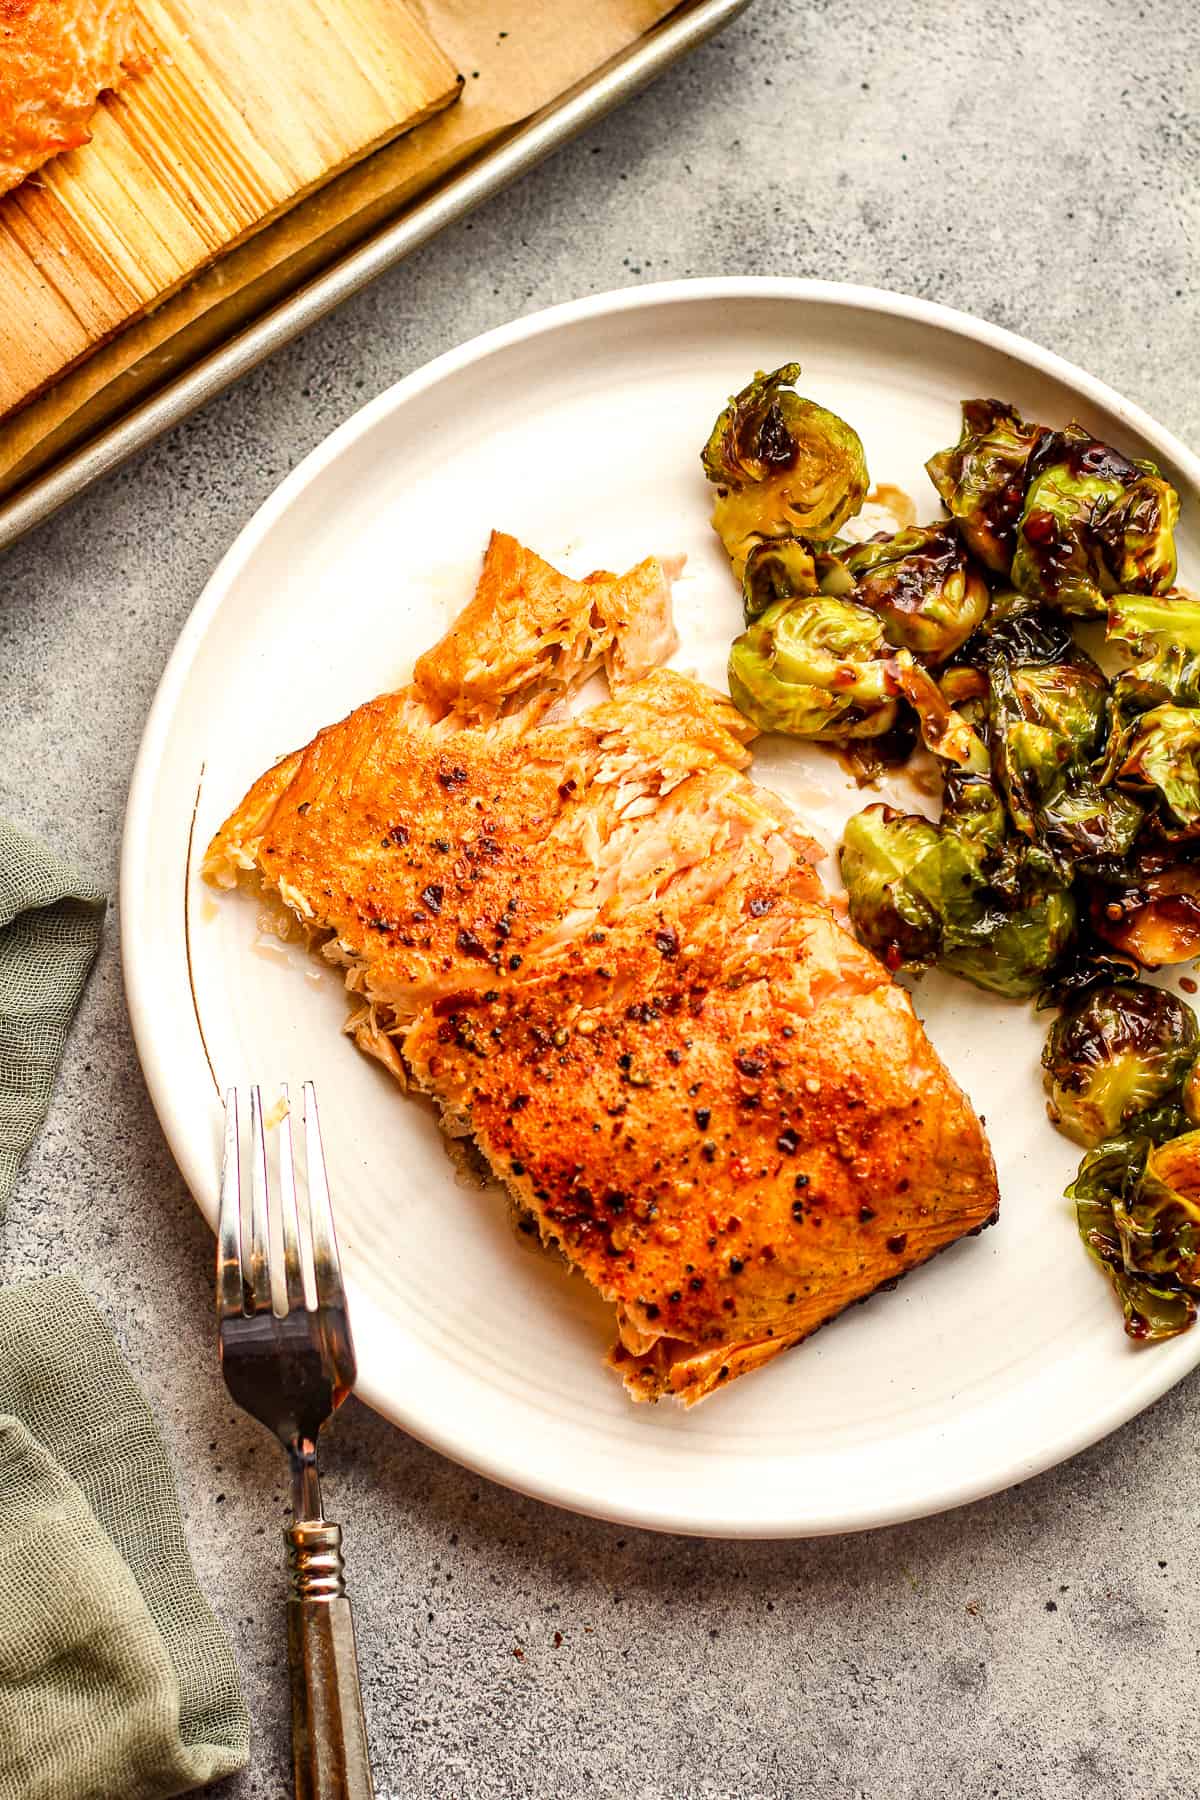 A plate with a large piece of cedar plank salmon plus teriyaki brussels sprouts.